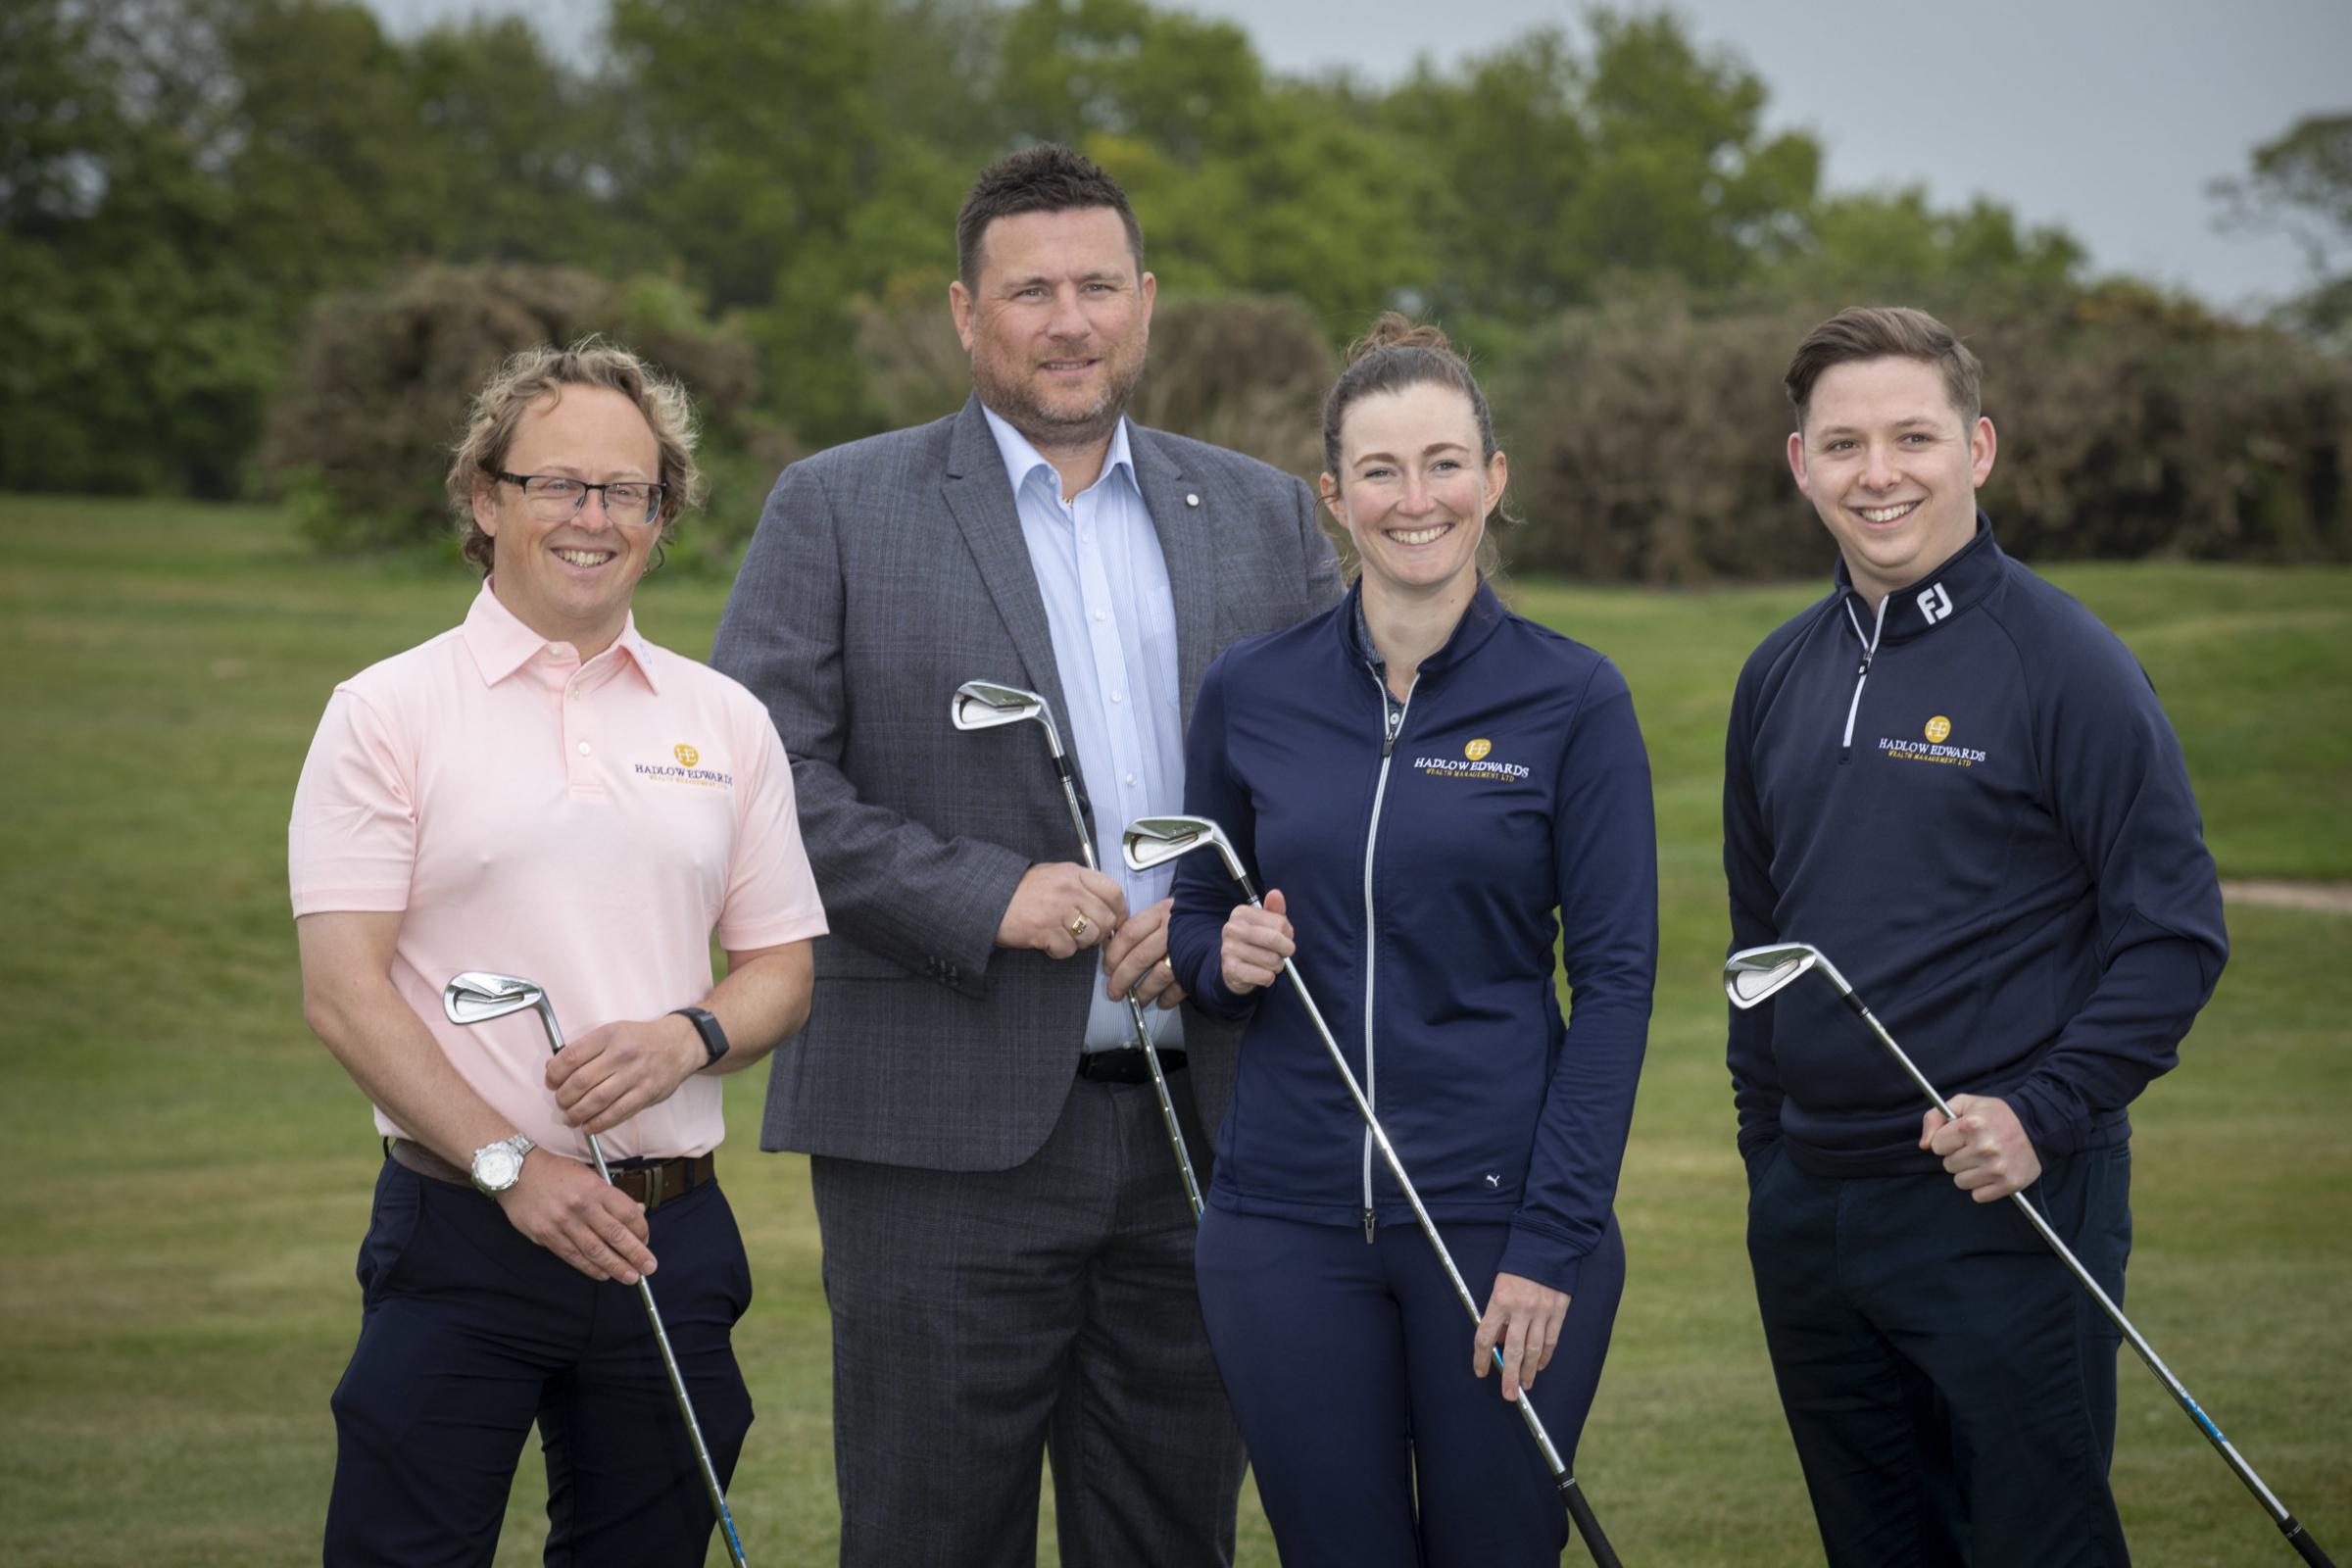 Hadlow Edwards sponsor LPGA tour pro Rachael Goodall, pictured with (from left) Jason Dransfield, assistant professional at Heswall Golf Club, James Parry and Dan Boden, of Hadlow Edwards. Photo: Mandy Jones Photography